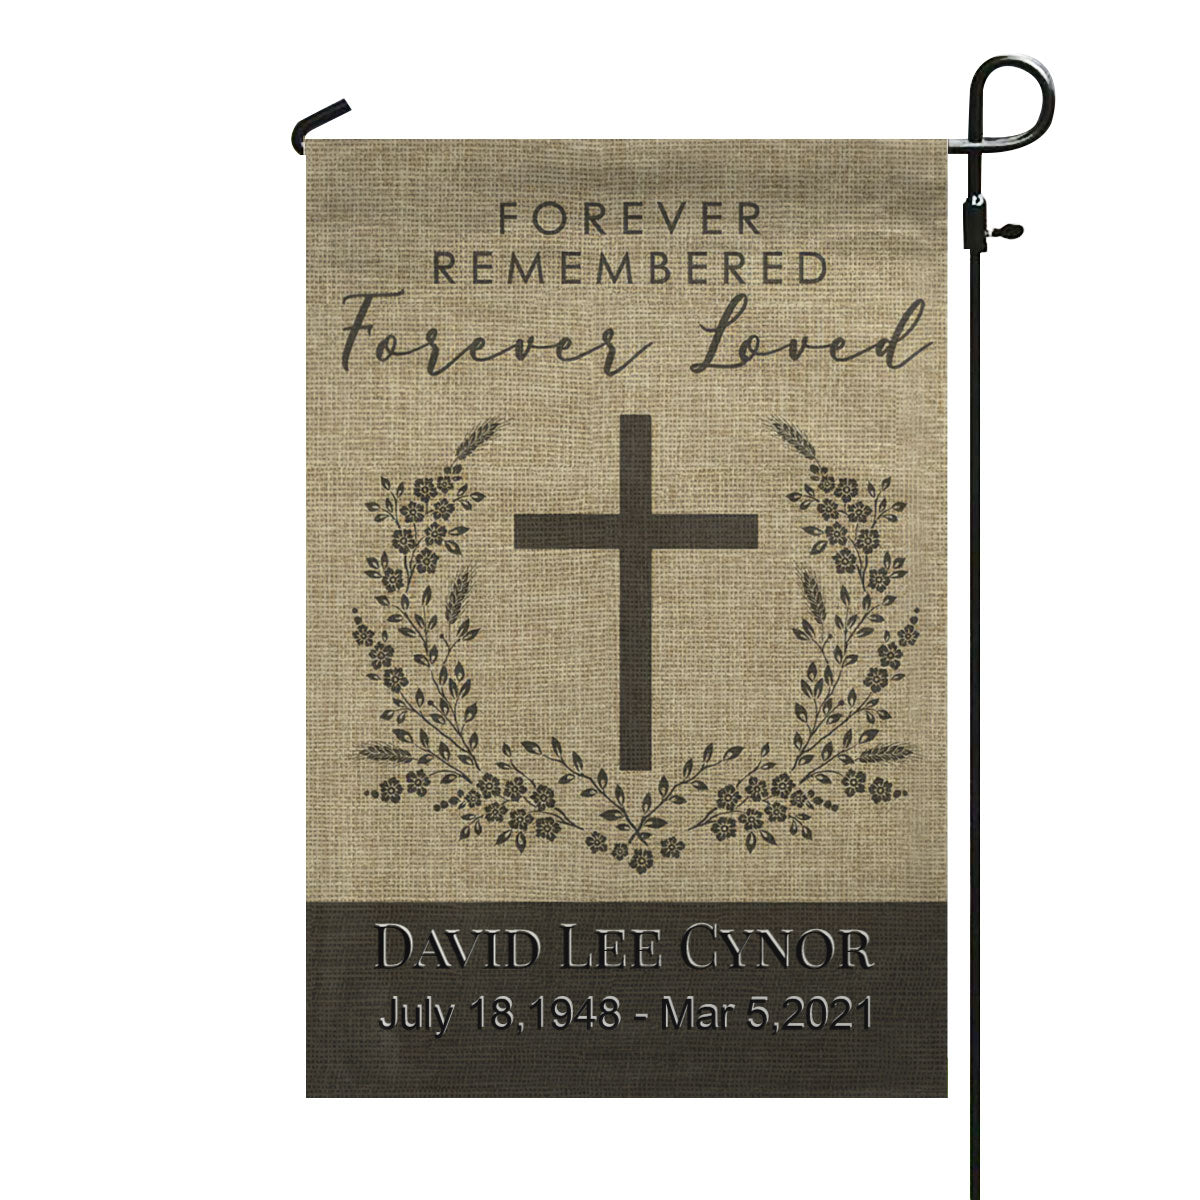 Personalized Forever Remembered Burlap Garden Flag